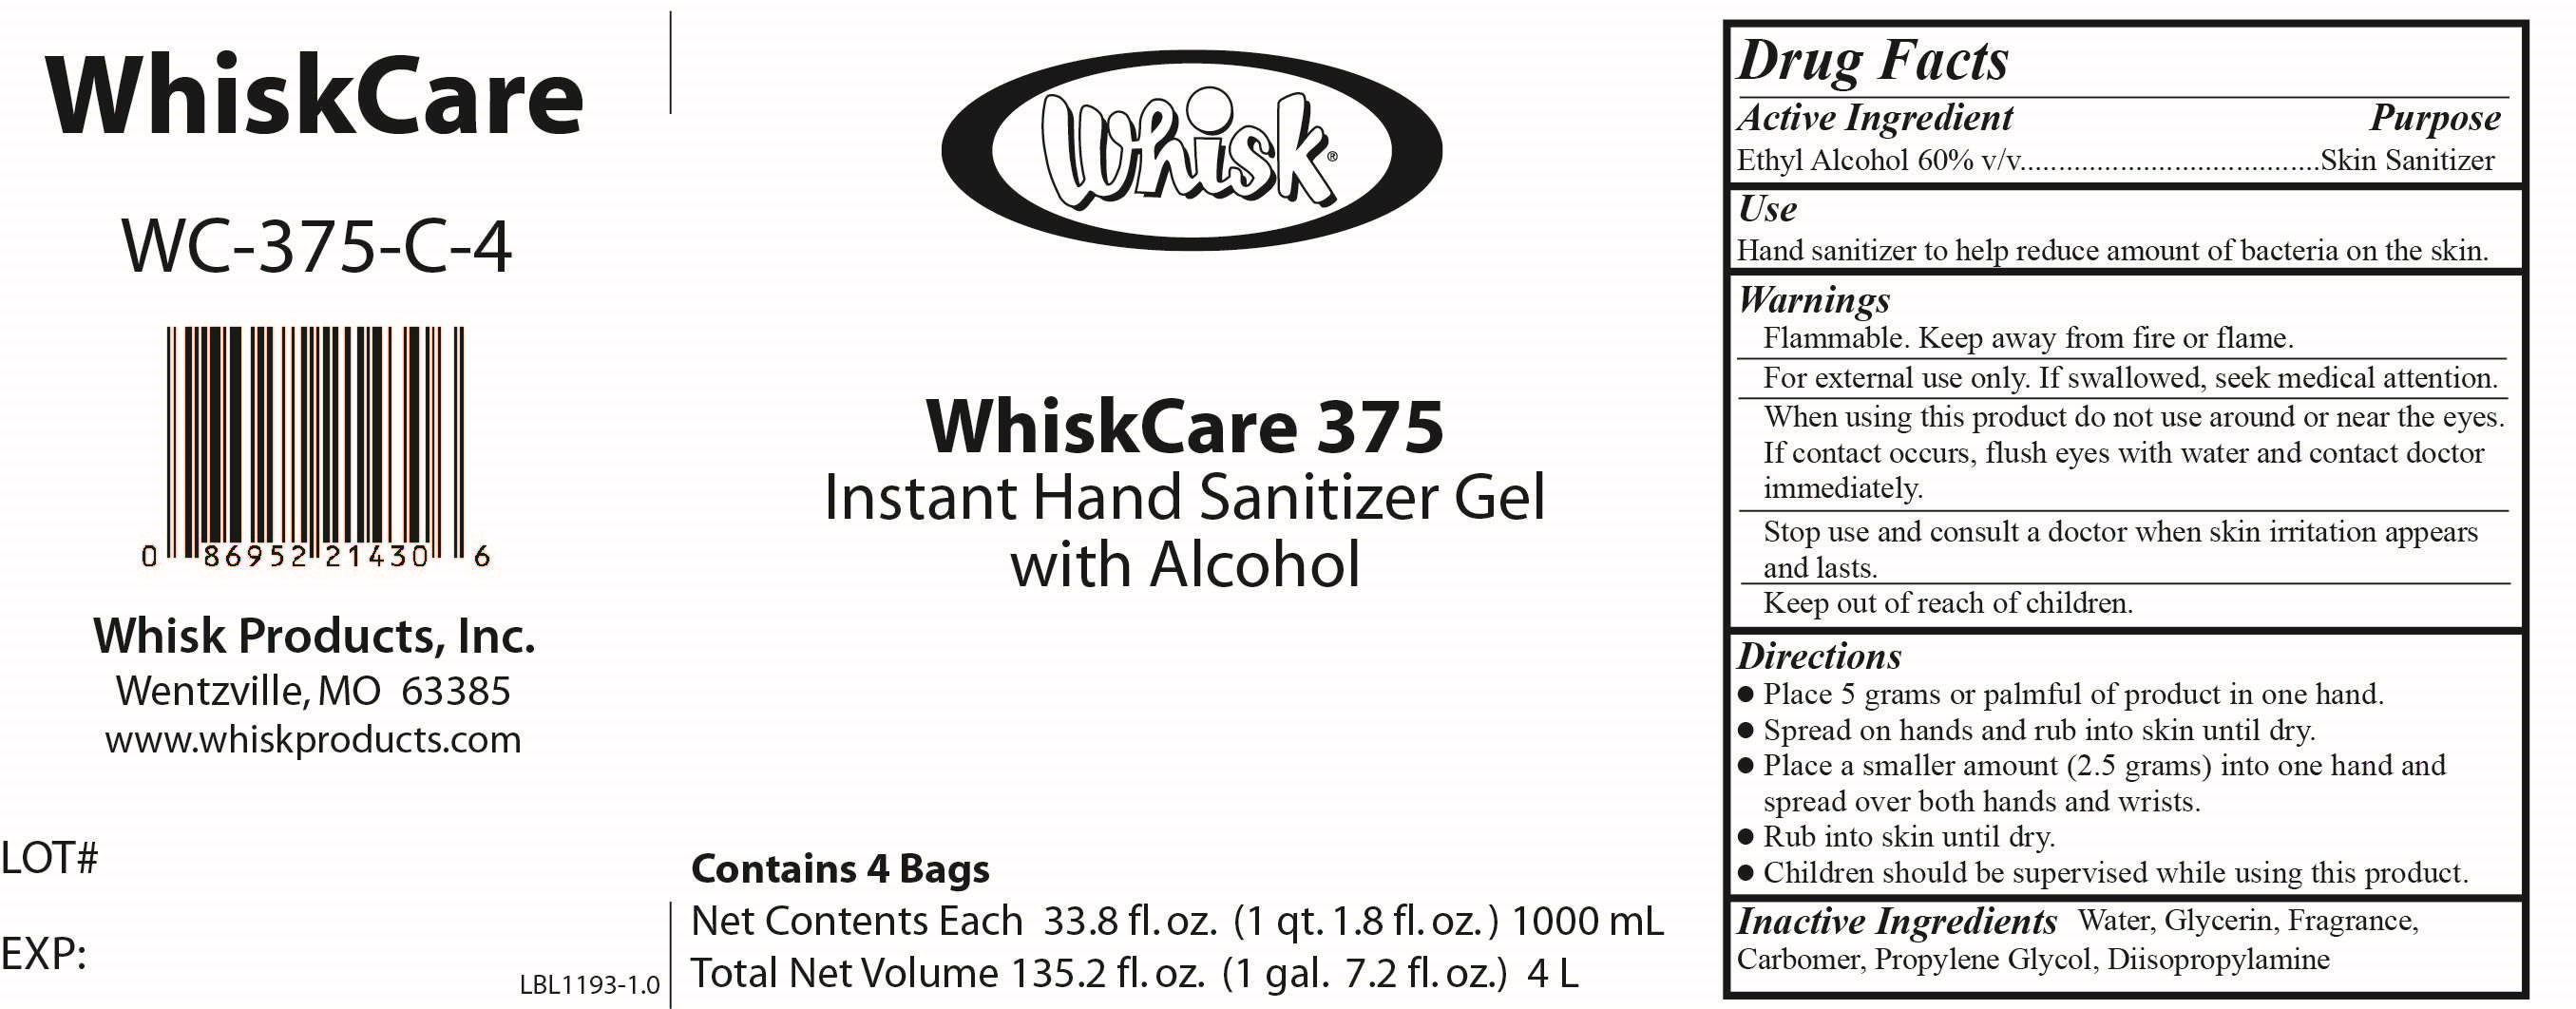 WhiskCare 375